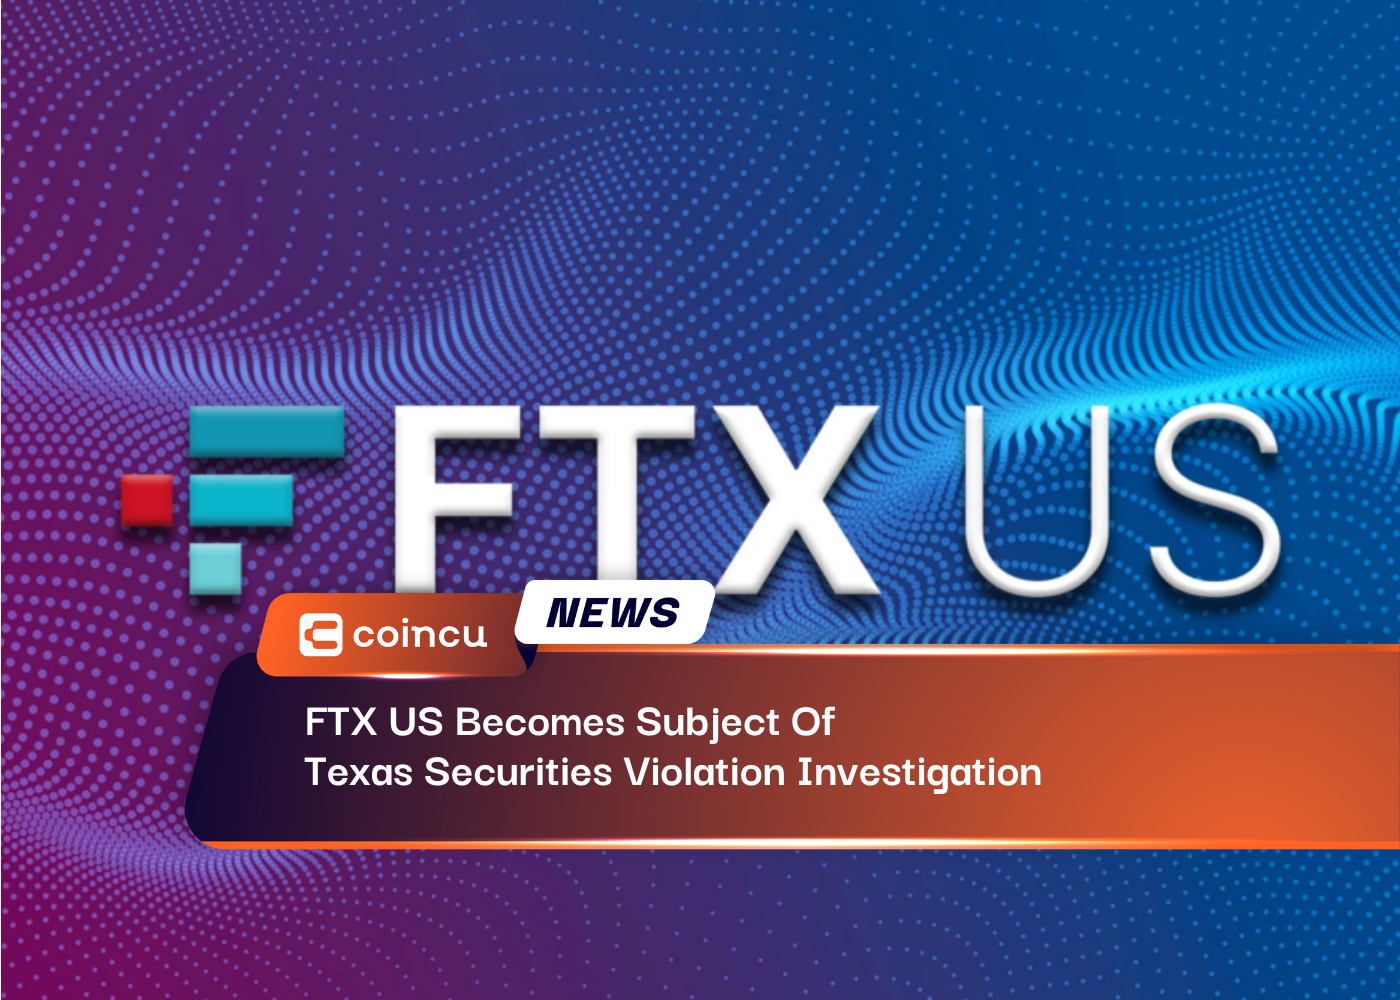 FTX US Becomes Subject Of Texas Securities Violation Investigation